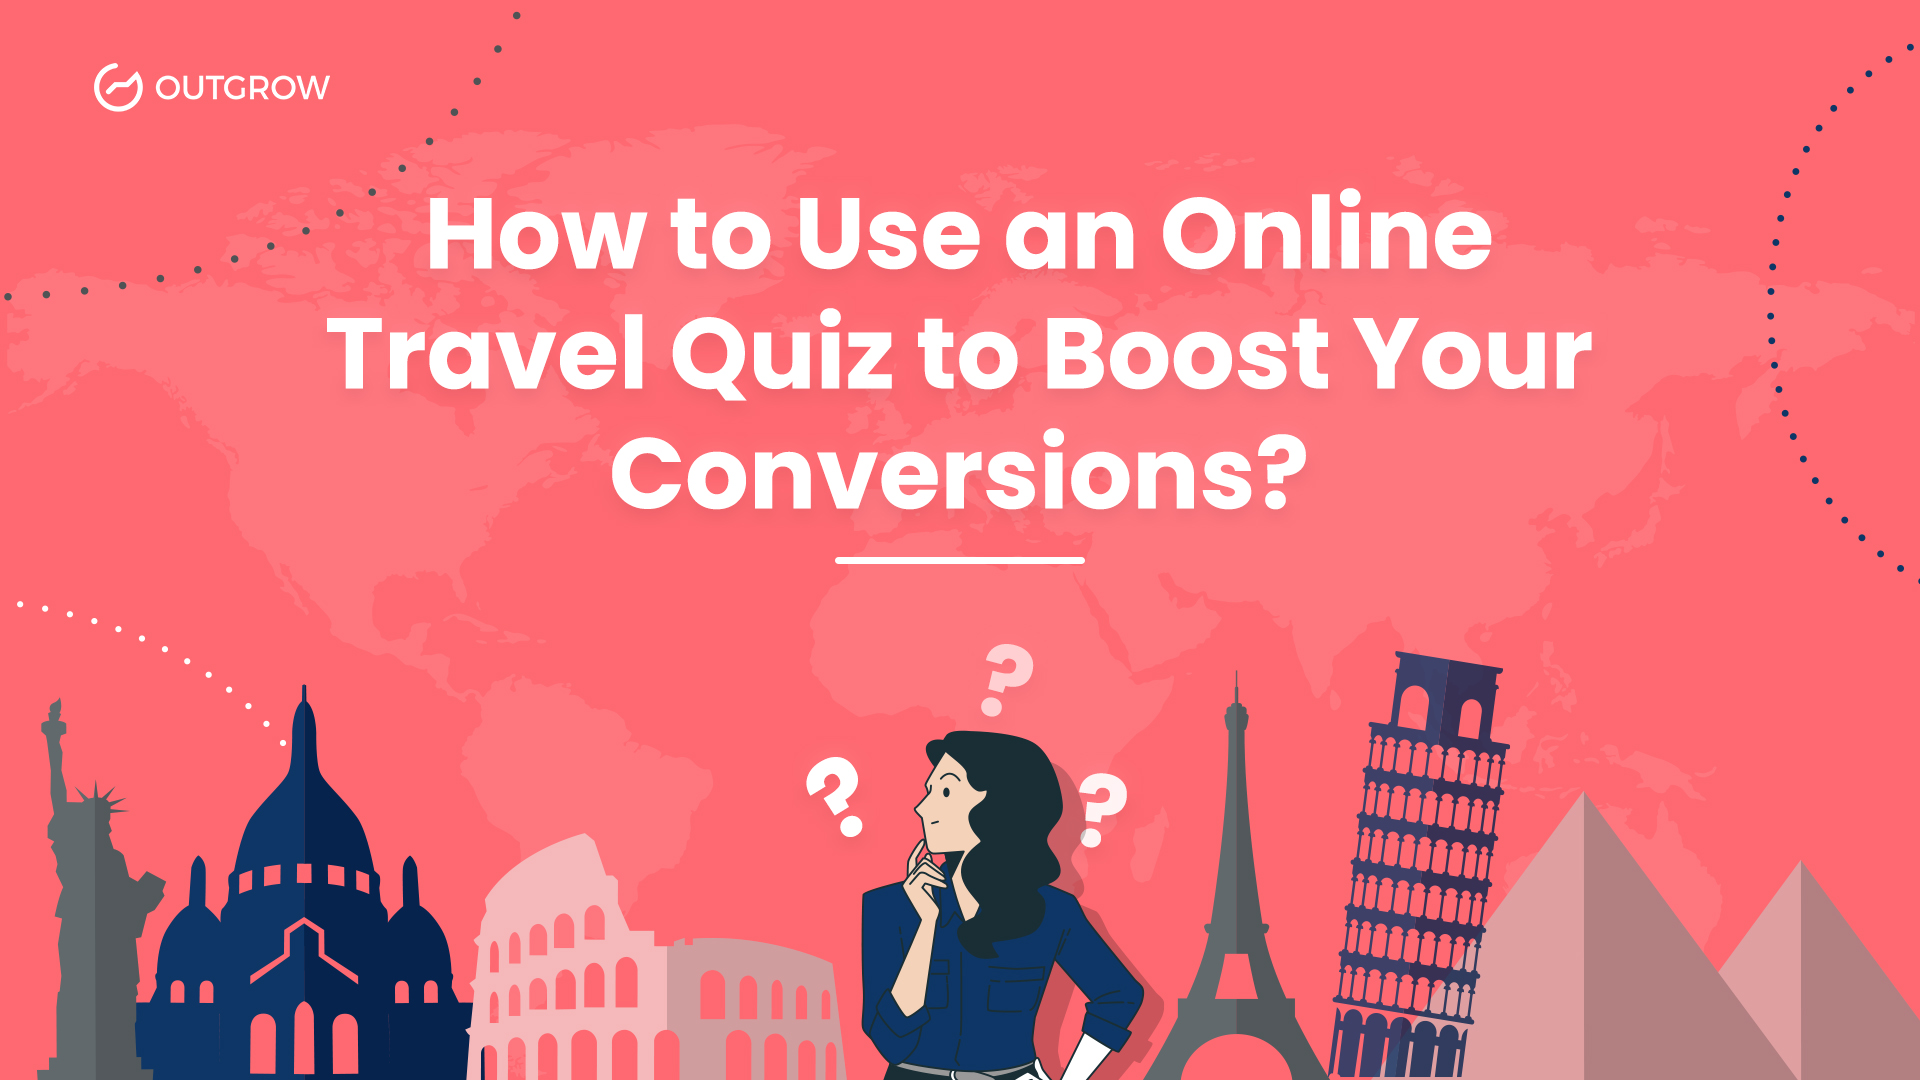 https://outgrow.co/blog/wp-content/uploads/2023/02/How-to-Use-an-Online-Travel-Quiz-to-Boost-Your.jpg